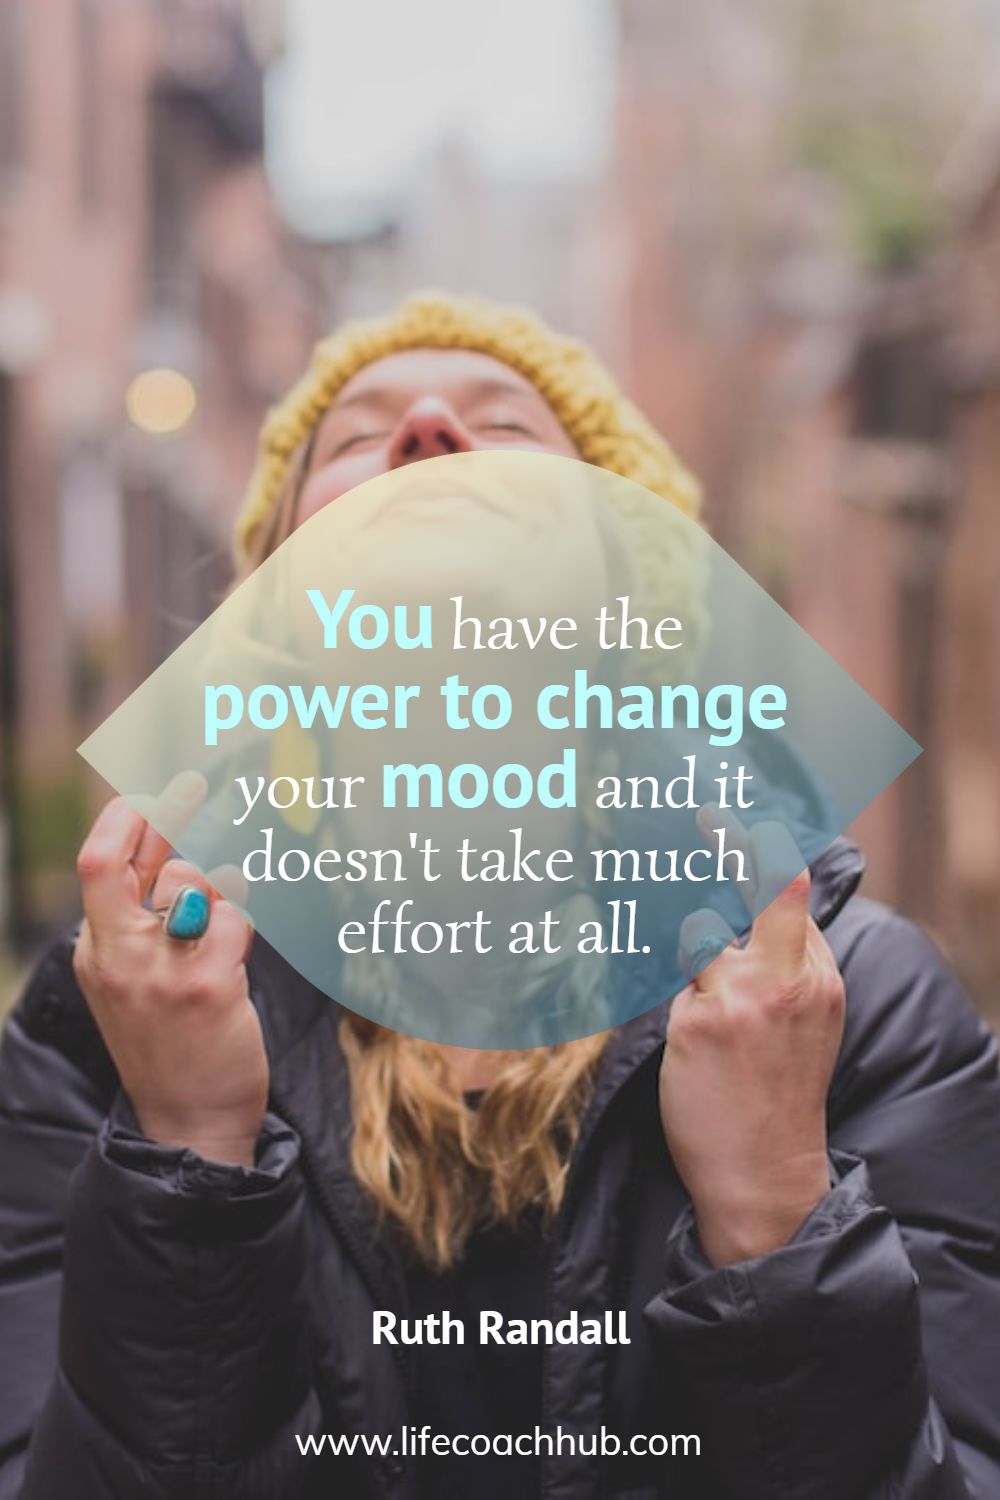 You have the power to change mood and it doesn't take much effort at all. Ruth Randall Coaching Quote